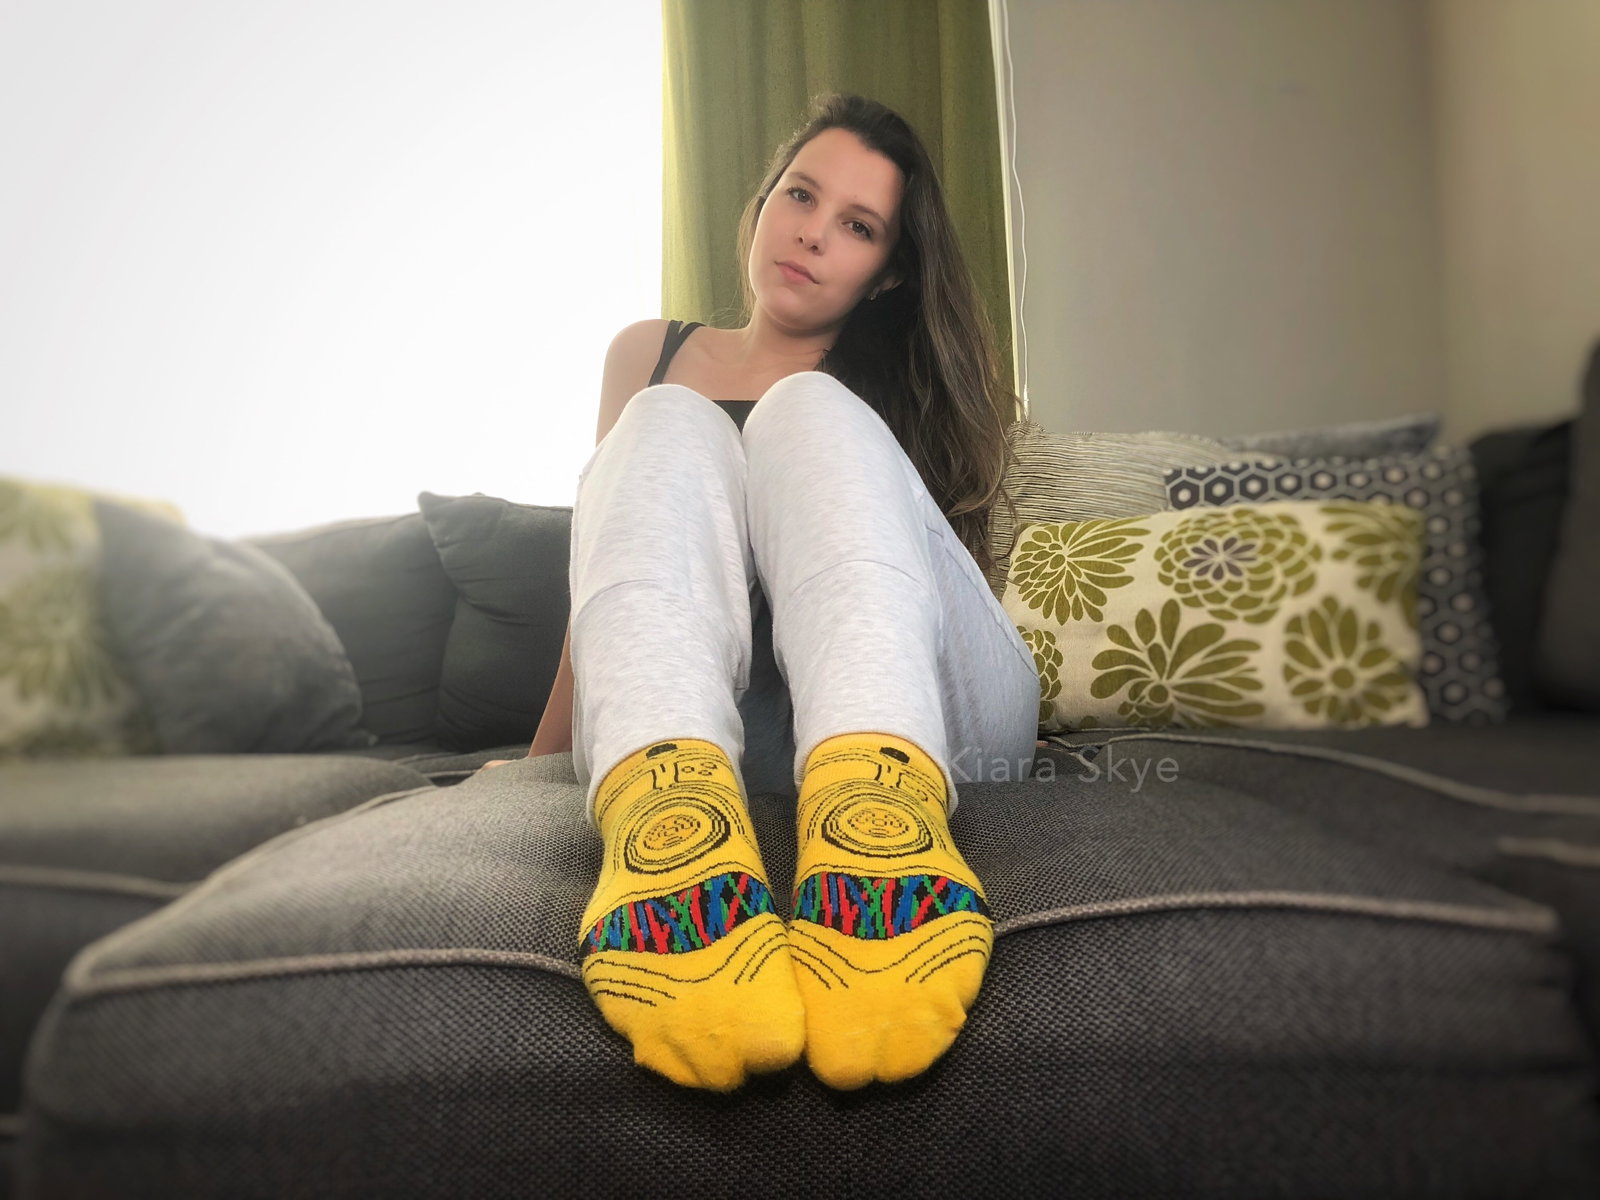 Photo by Kiara Skye with the username @KiaraSkye, who is a star user,  May 4, 2020 at 5:03 PM. The post is about the topic Hot Girls in Socks and the text says '🎬 Happy Star Wars Day nerds! 🦶 

🧦https://onlyfans.com/kiaraskye

🌑(Mega 60+ set of me with these C3PO socks is going on my fan site! PLUS a special guest later!) 

#starwars #c3pO #socks #maythe4thbewithyou #brunette #smallfeet #smellysocks..'